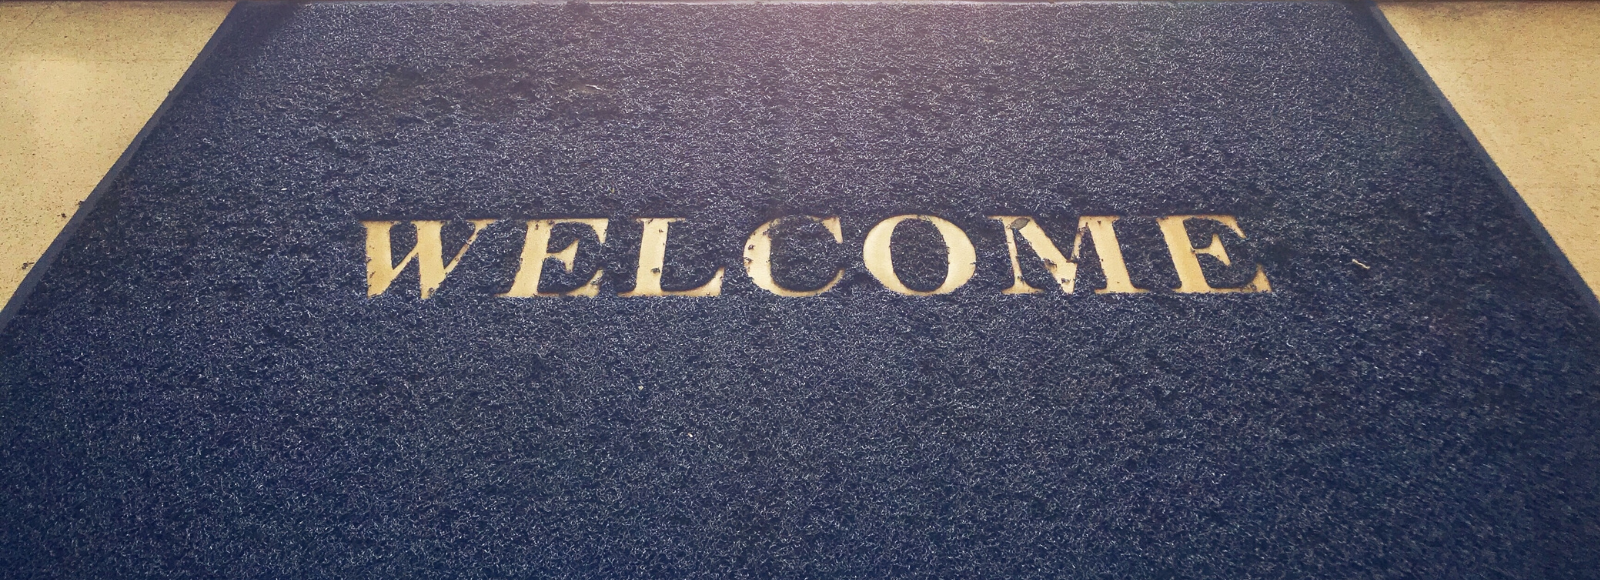 Welcome mat at entrance to building